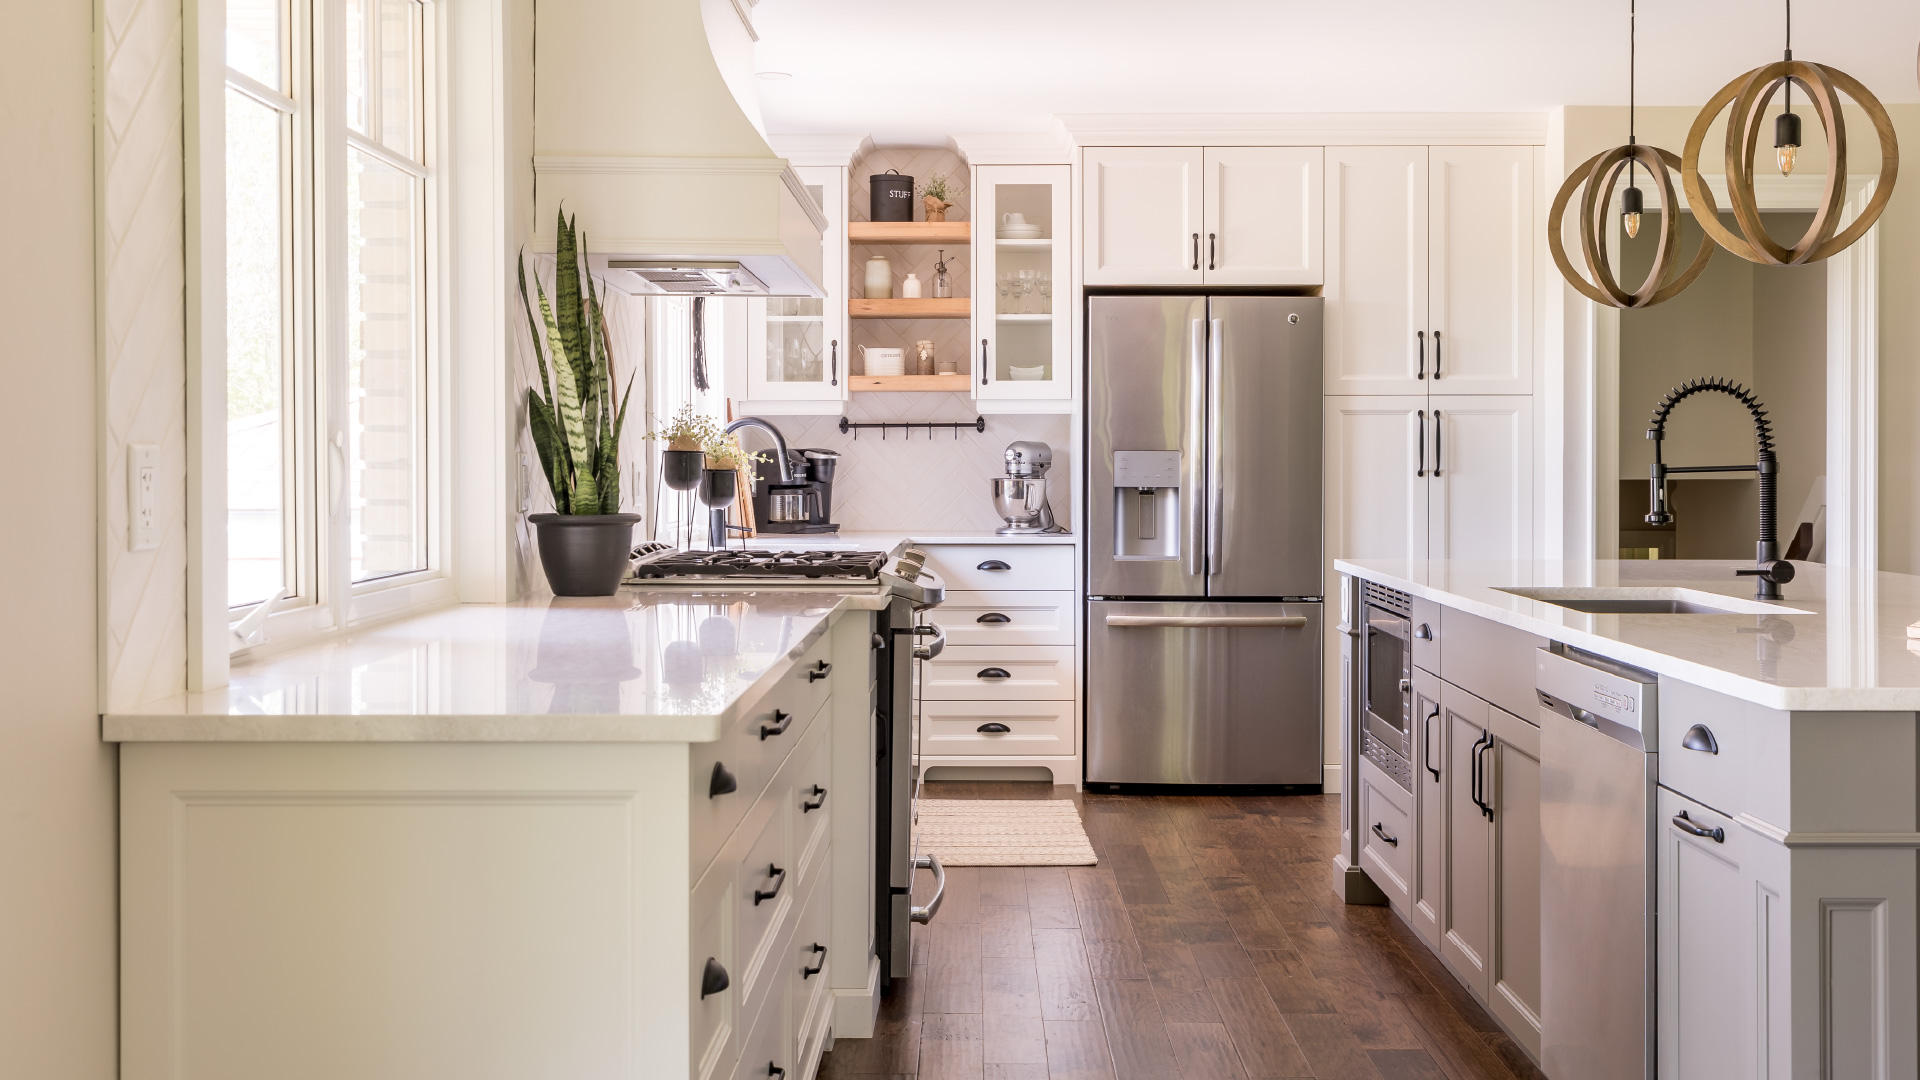 Custom kitchen cabinets with a stainless steel fridge